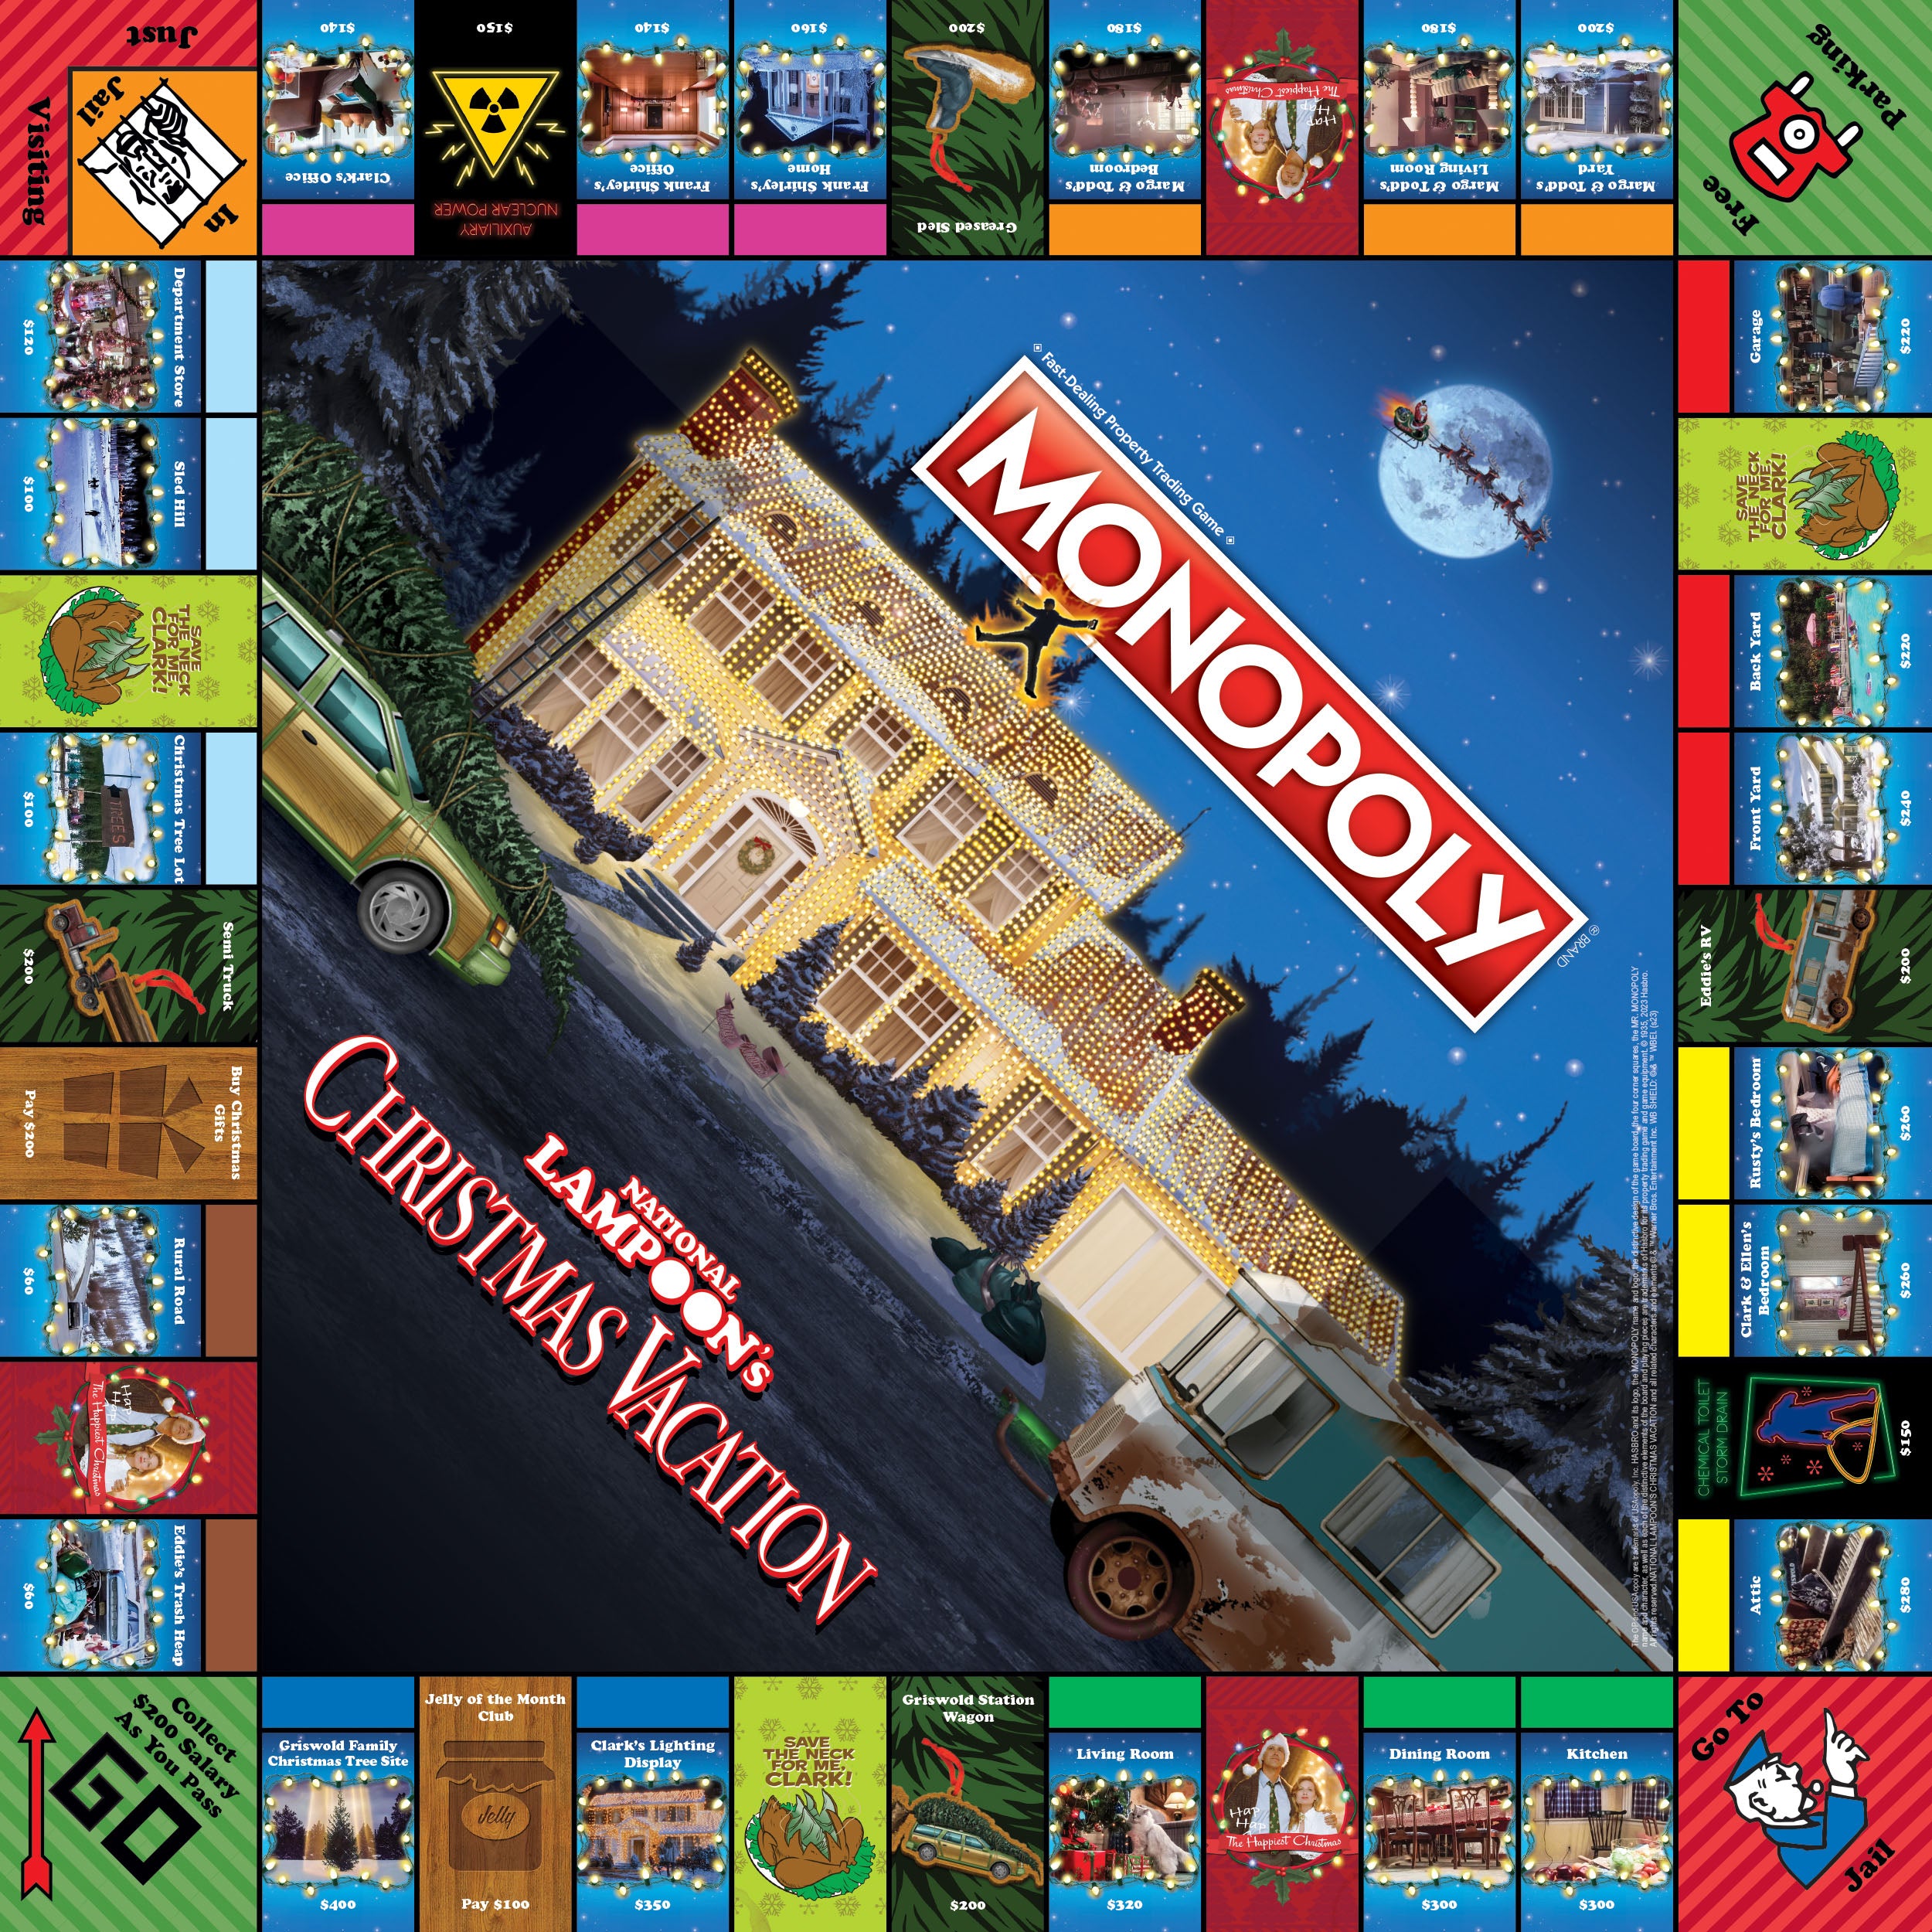 Monopoly: The game that starts Christmas arguments across the world